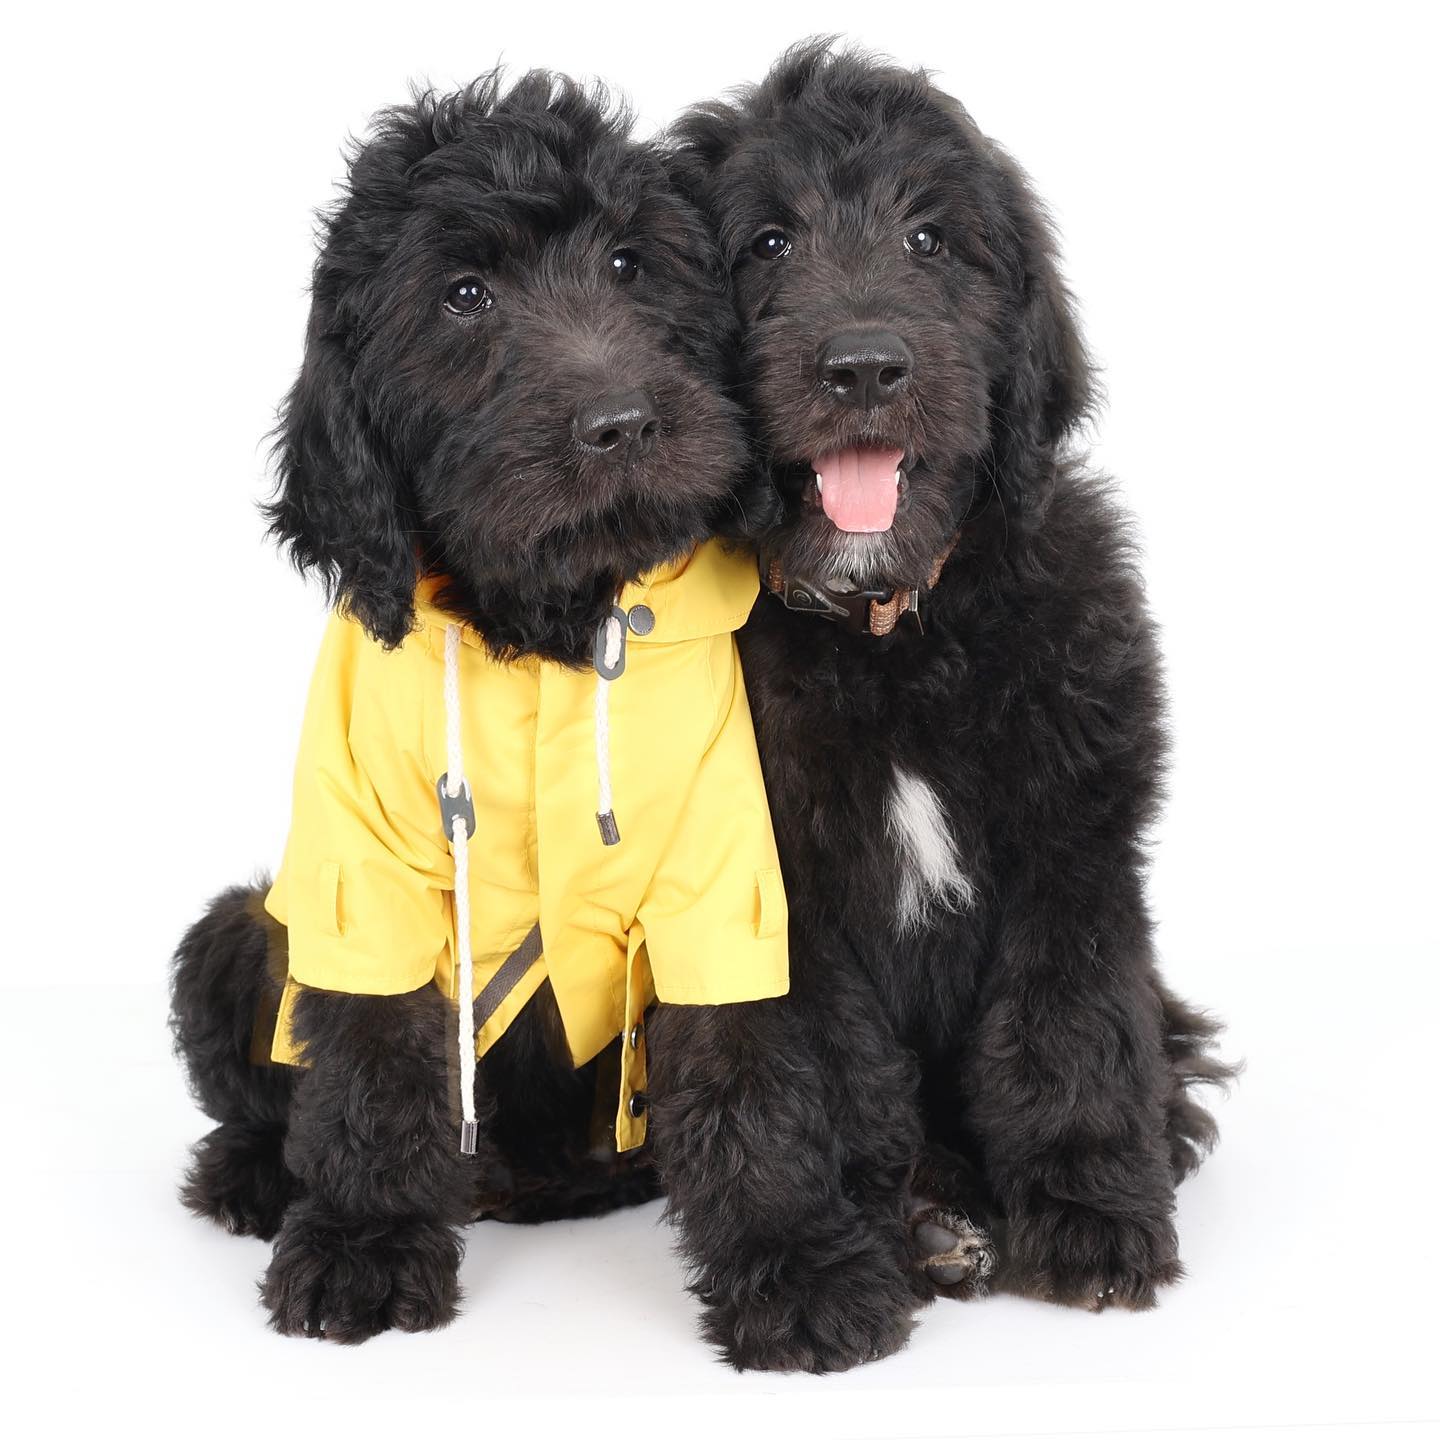 Two black golden doodles posing for the camera. Wen is wearing a rain jacket. The jacket can be purchased from Fletch&Lo